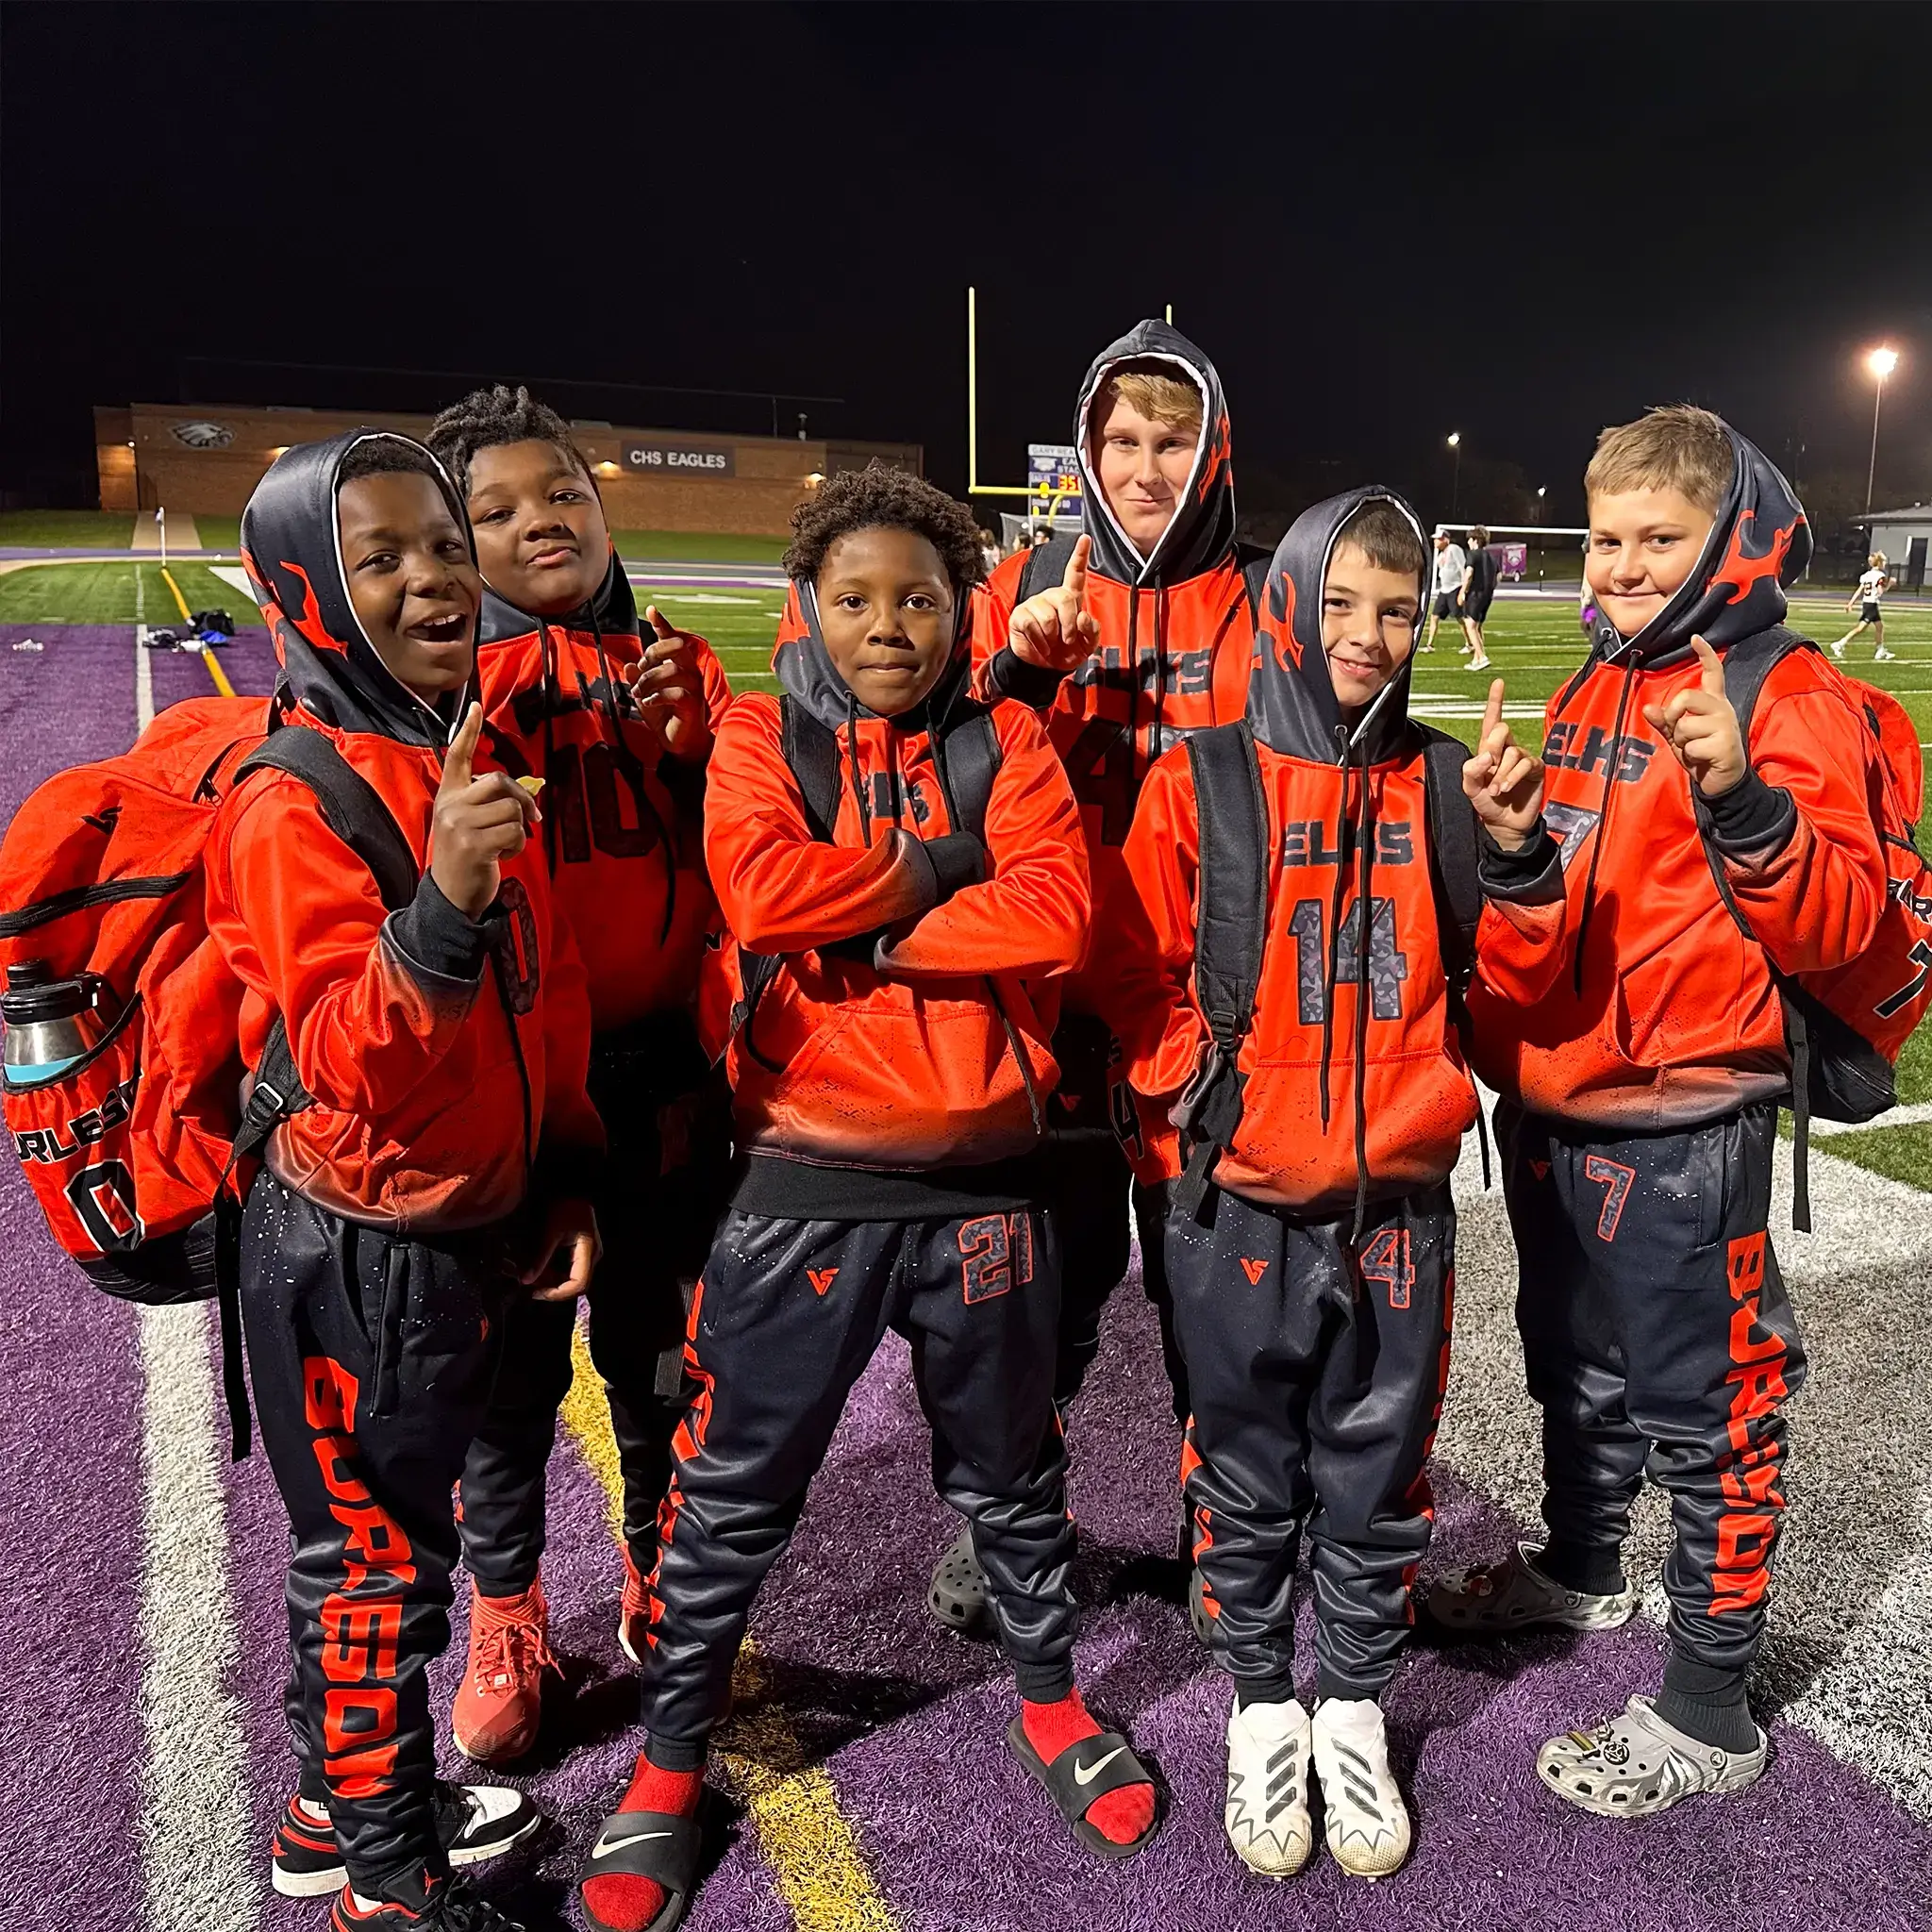 Burleson Elks 7v7 Players in Versus Gear After a Game